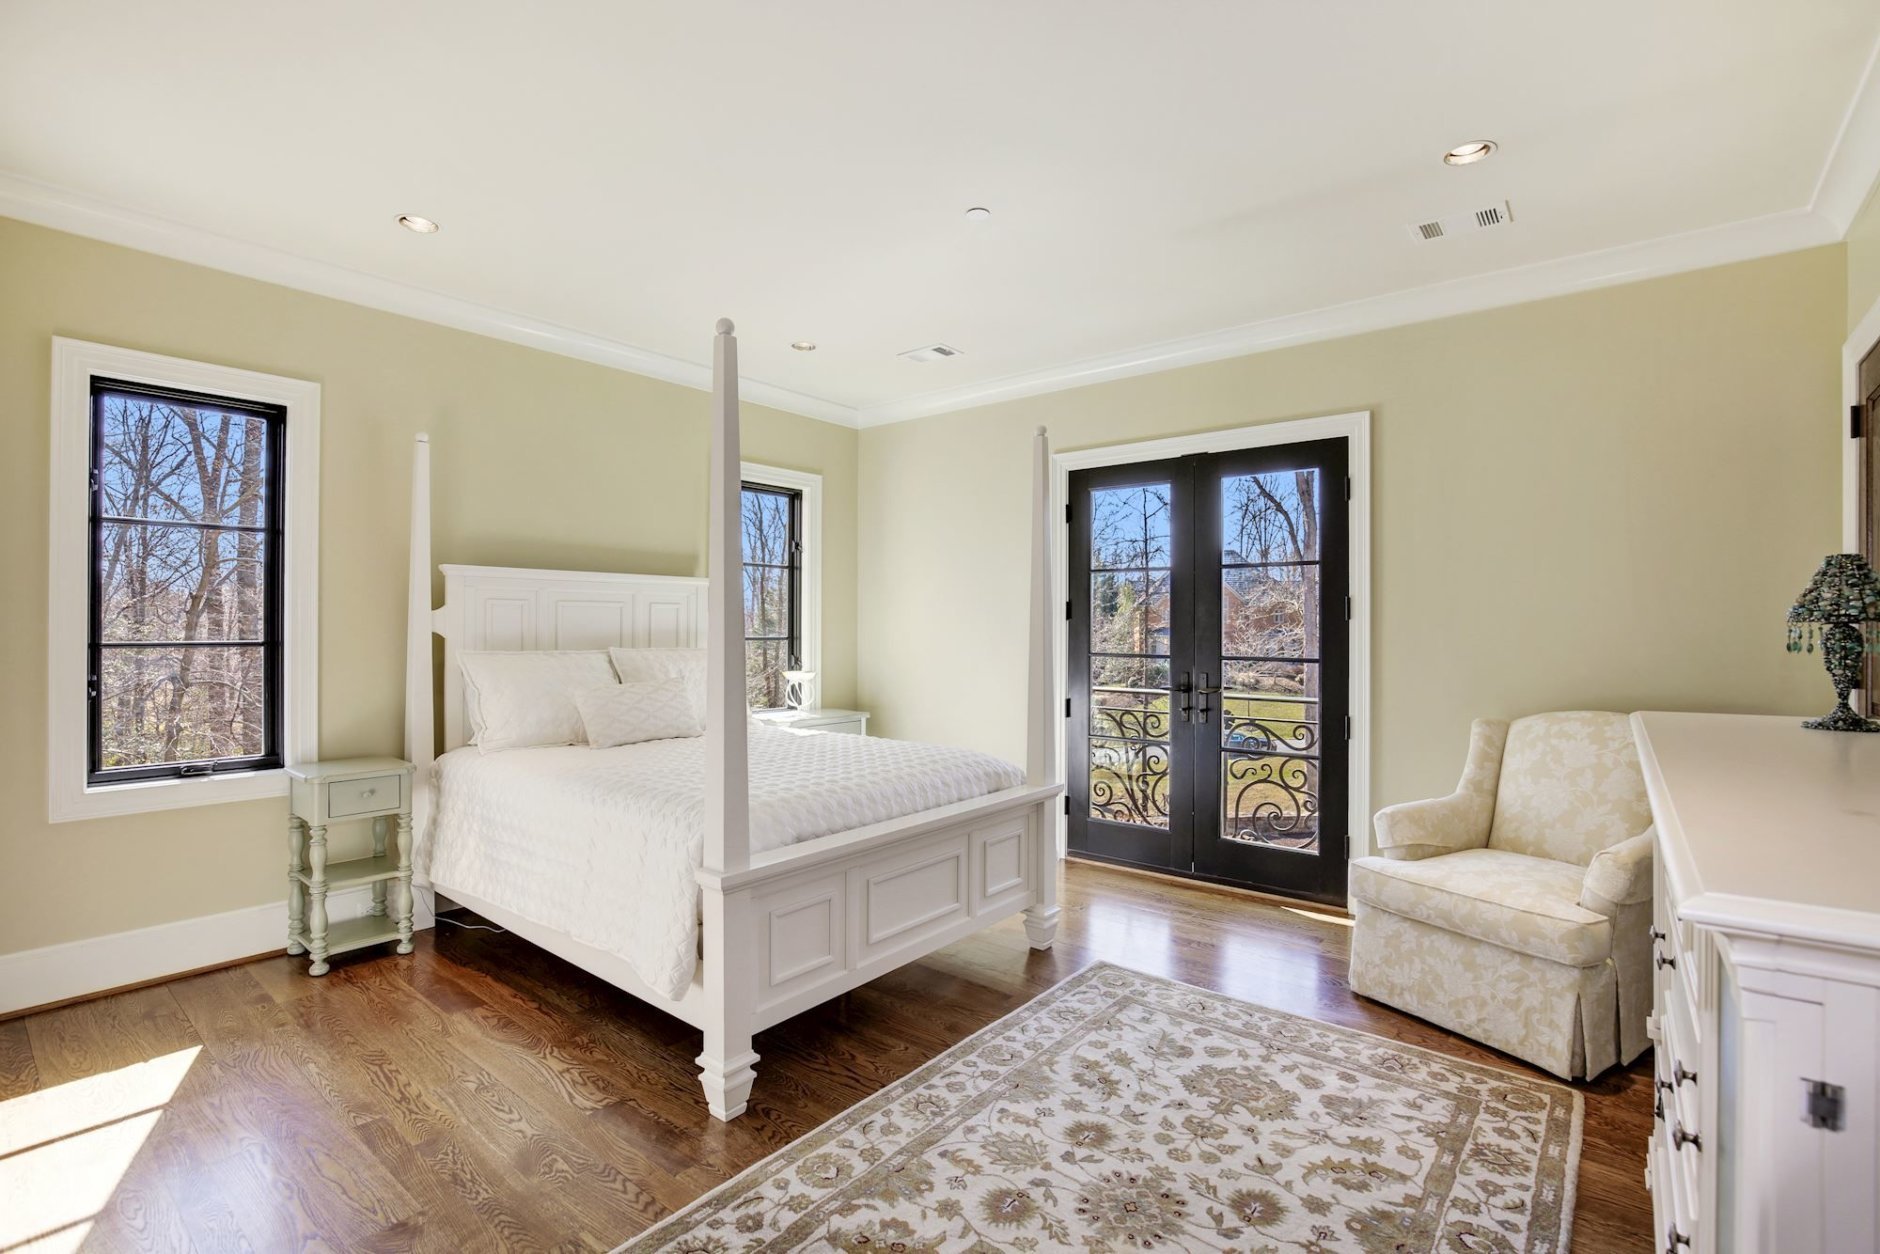 One of the six bedrooms. (Courtesy Washington Fine Properties)